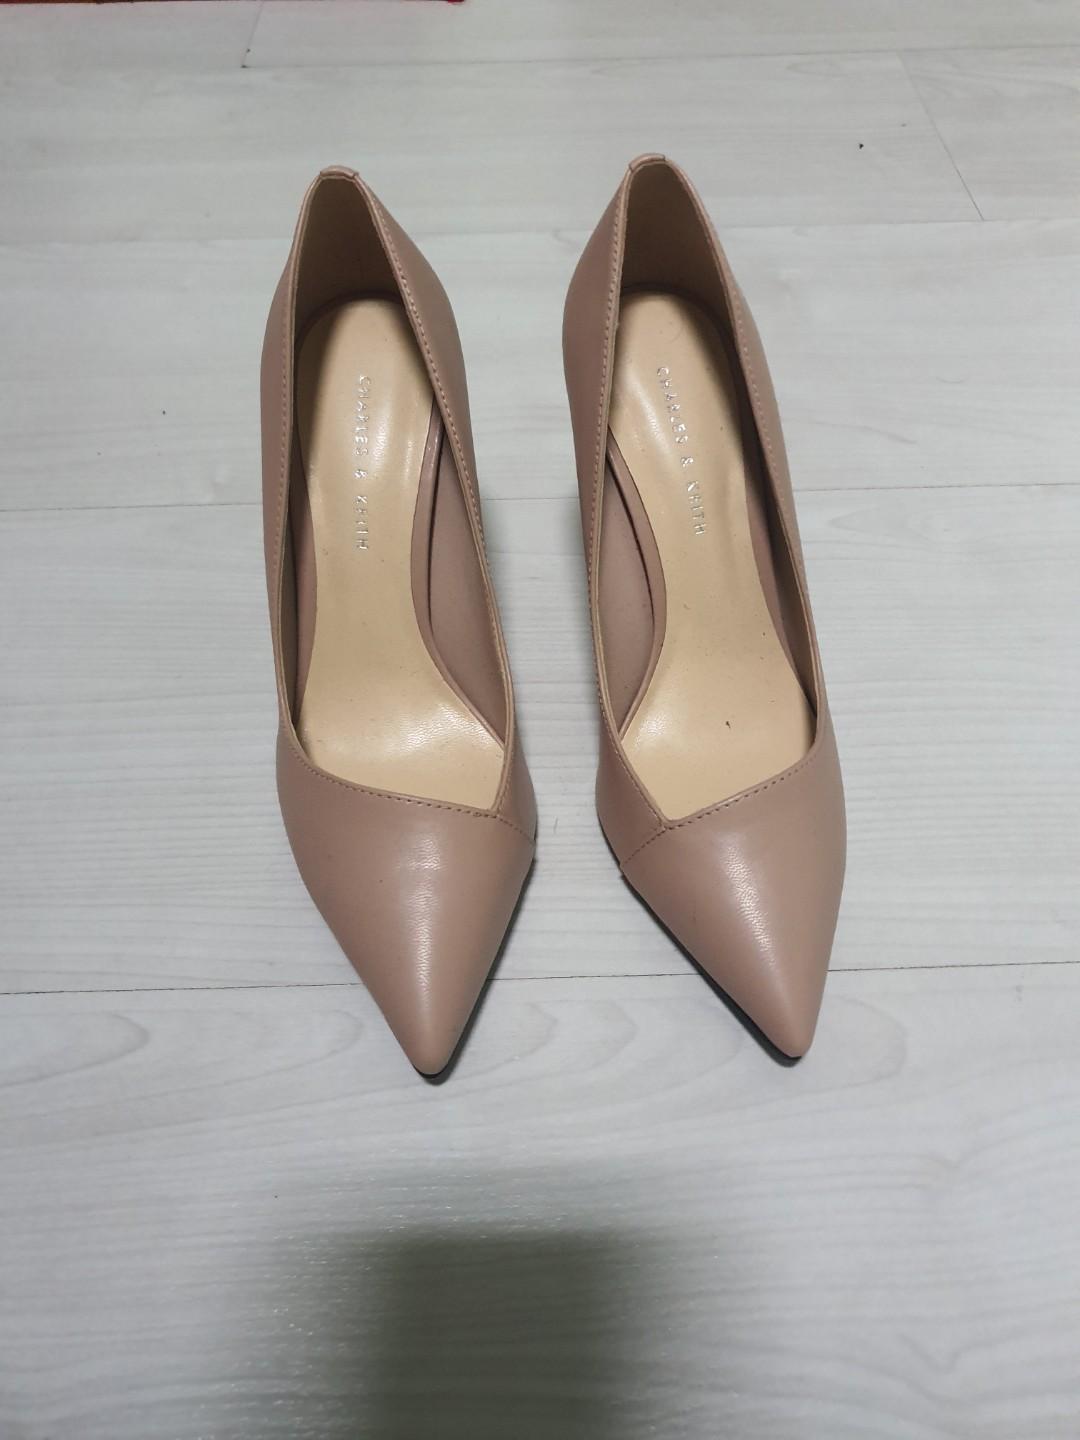 bede Woods Fortov Charles and Keith] BRAND NEW! Asymmetrical Cut Stiletto Pumps size 34,  Women's Fashion, Footwear, Heels on Carousell